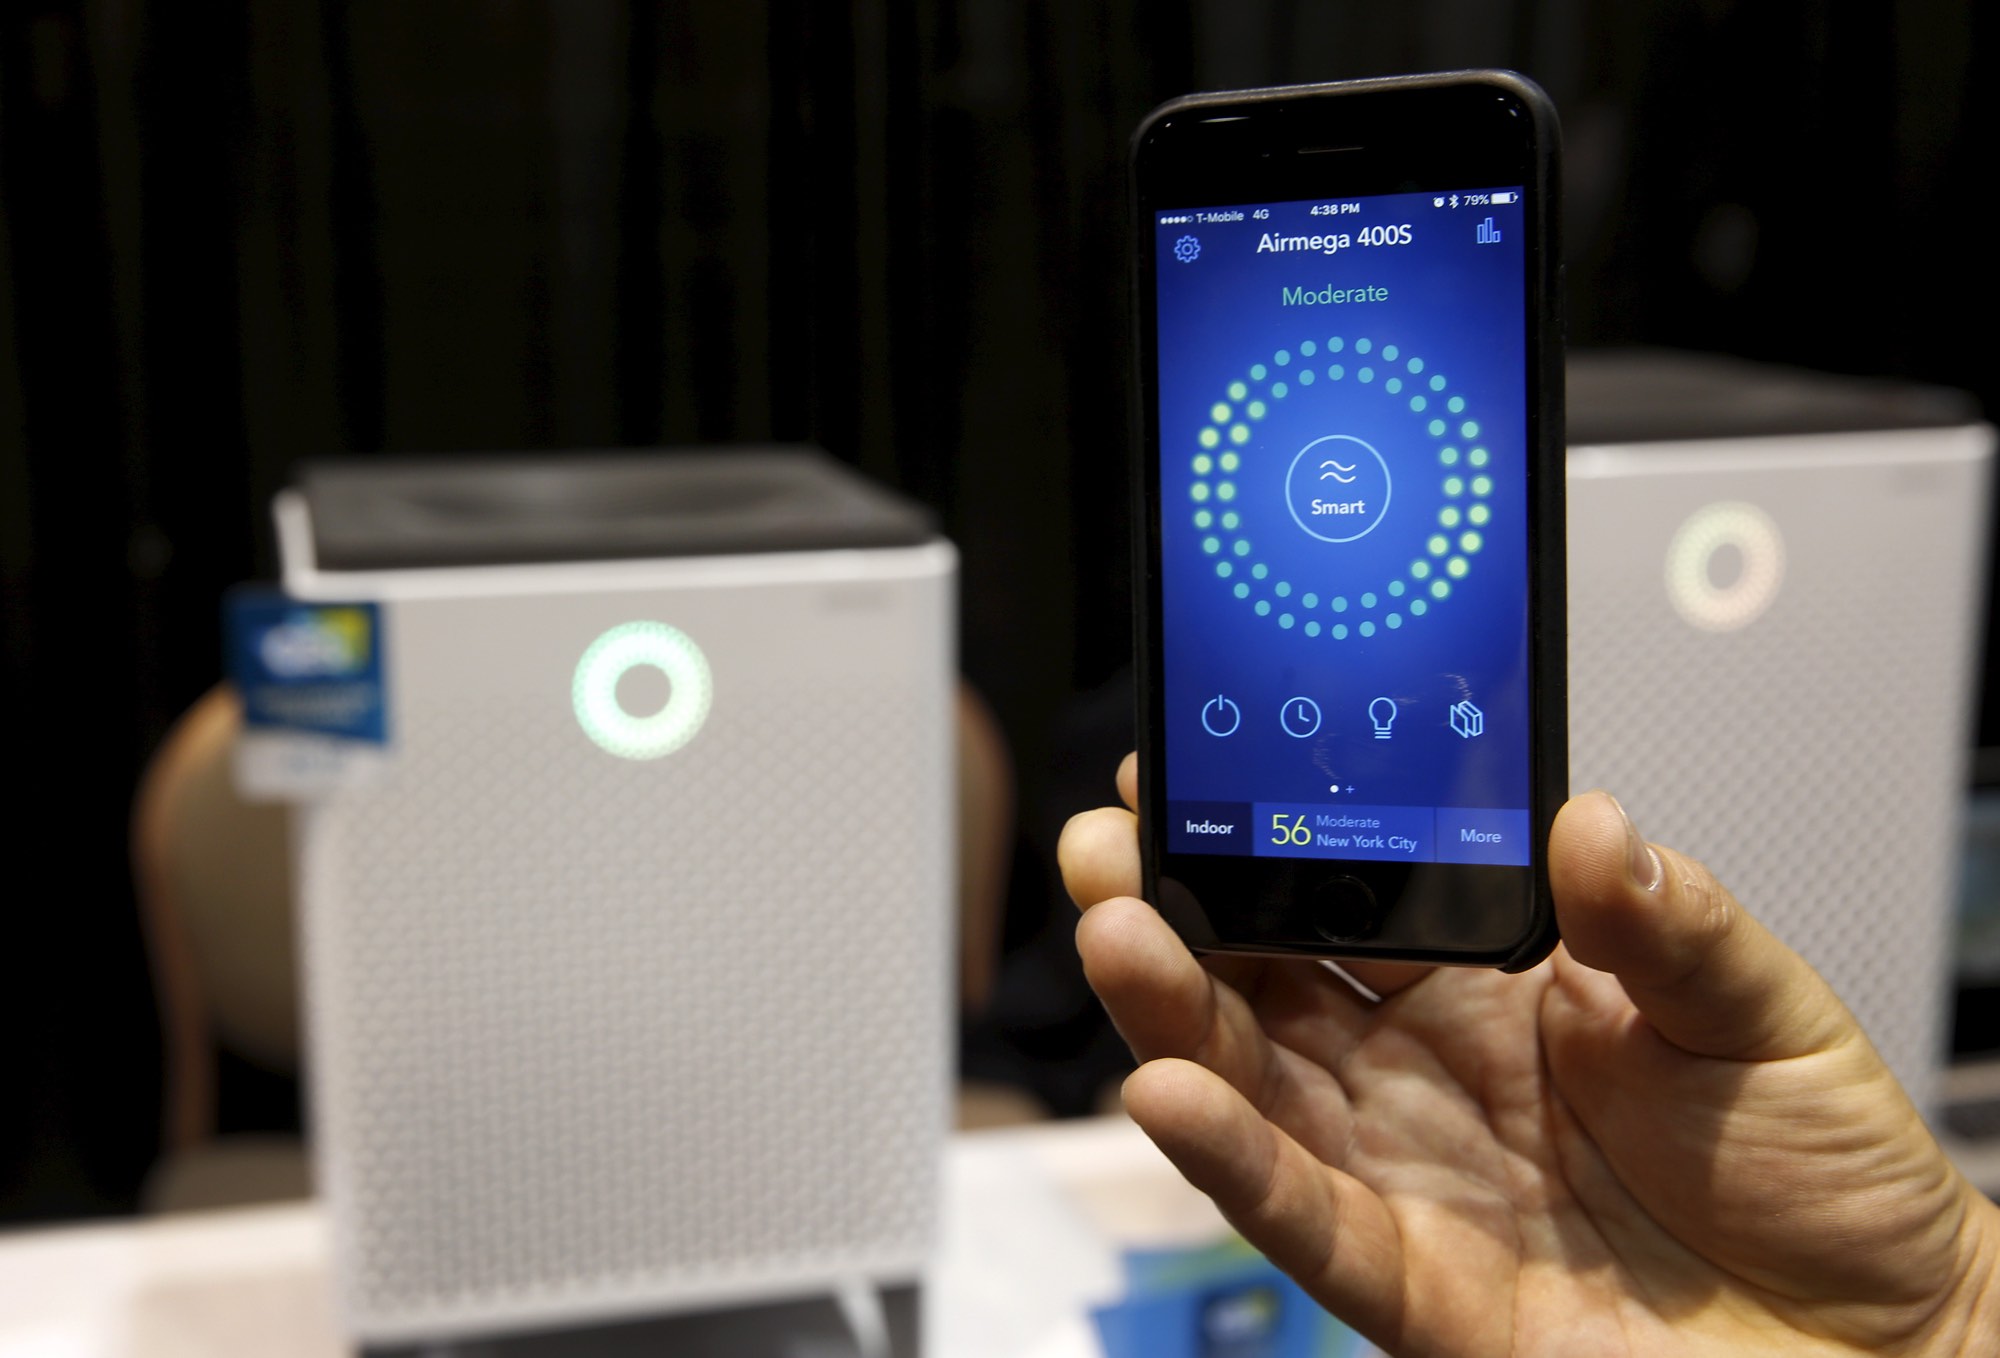 A smartphone receives real-time information on air quality from an Airmega air purifier from Coway. The WiFi-enabled, smart air purifiers from South Korea range in price from $749.00-$849.00 depending on the size. REUTERS